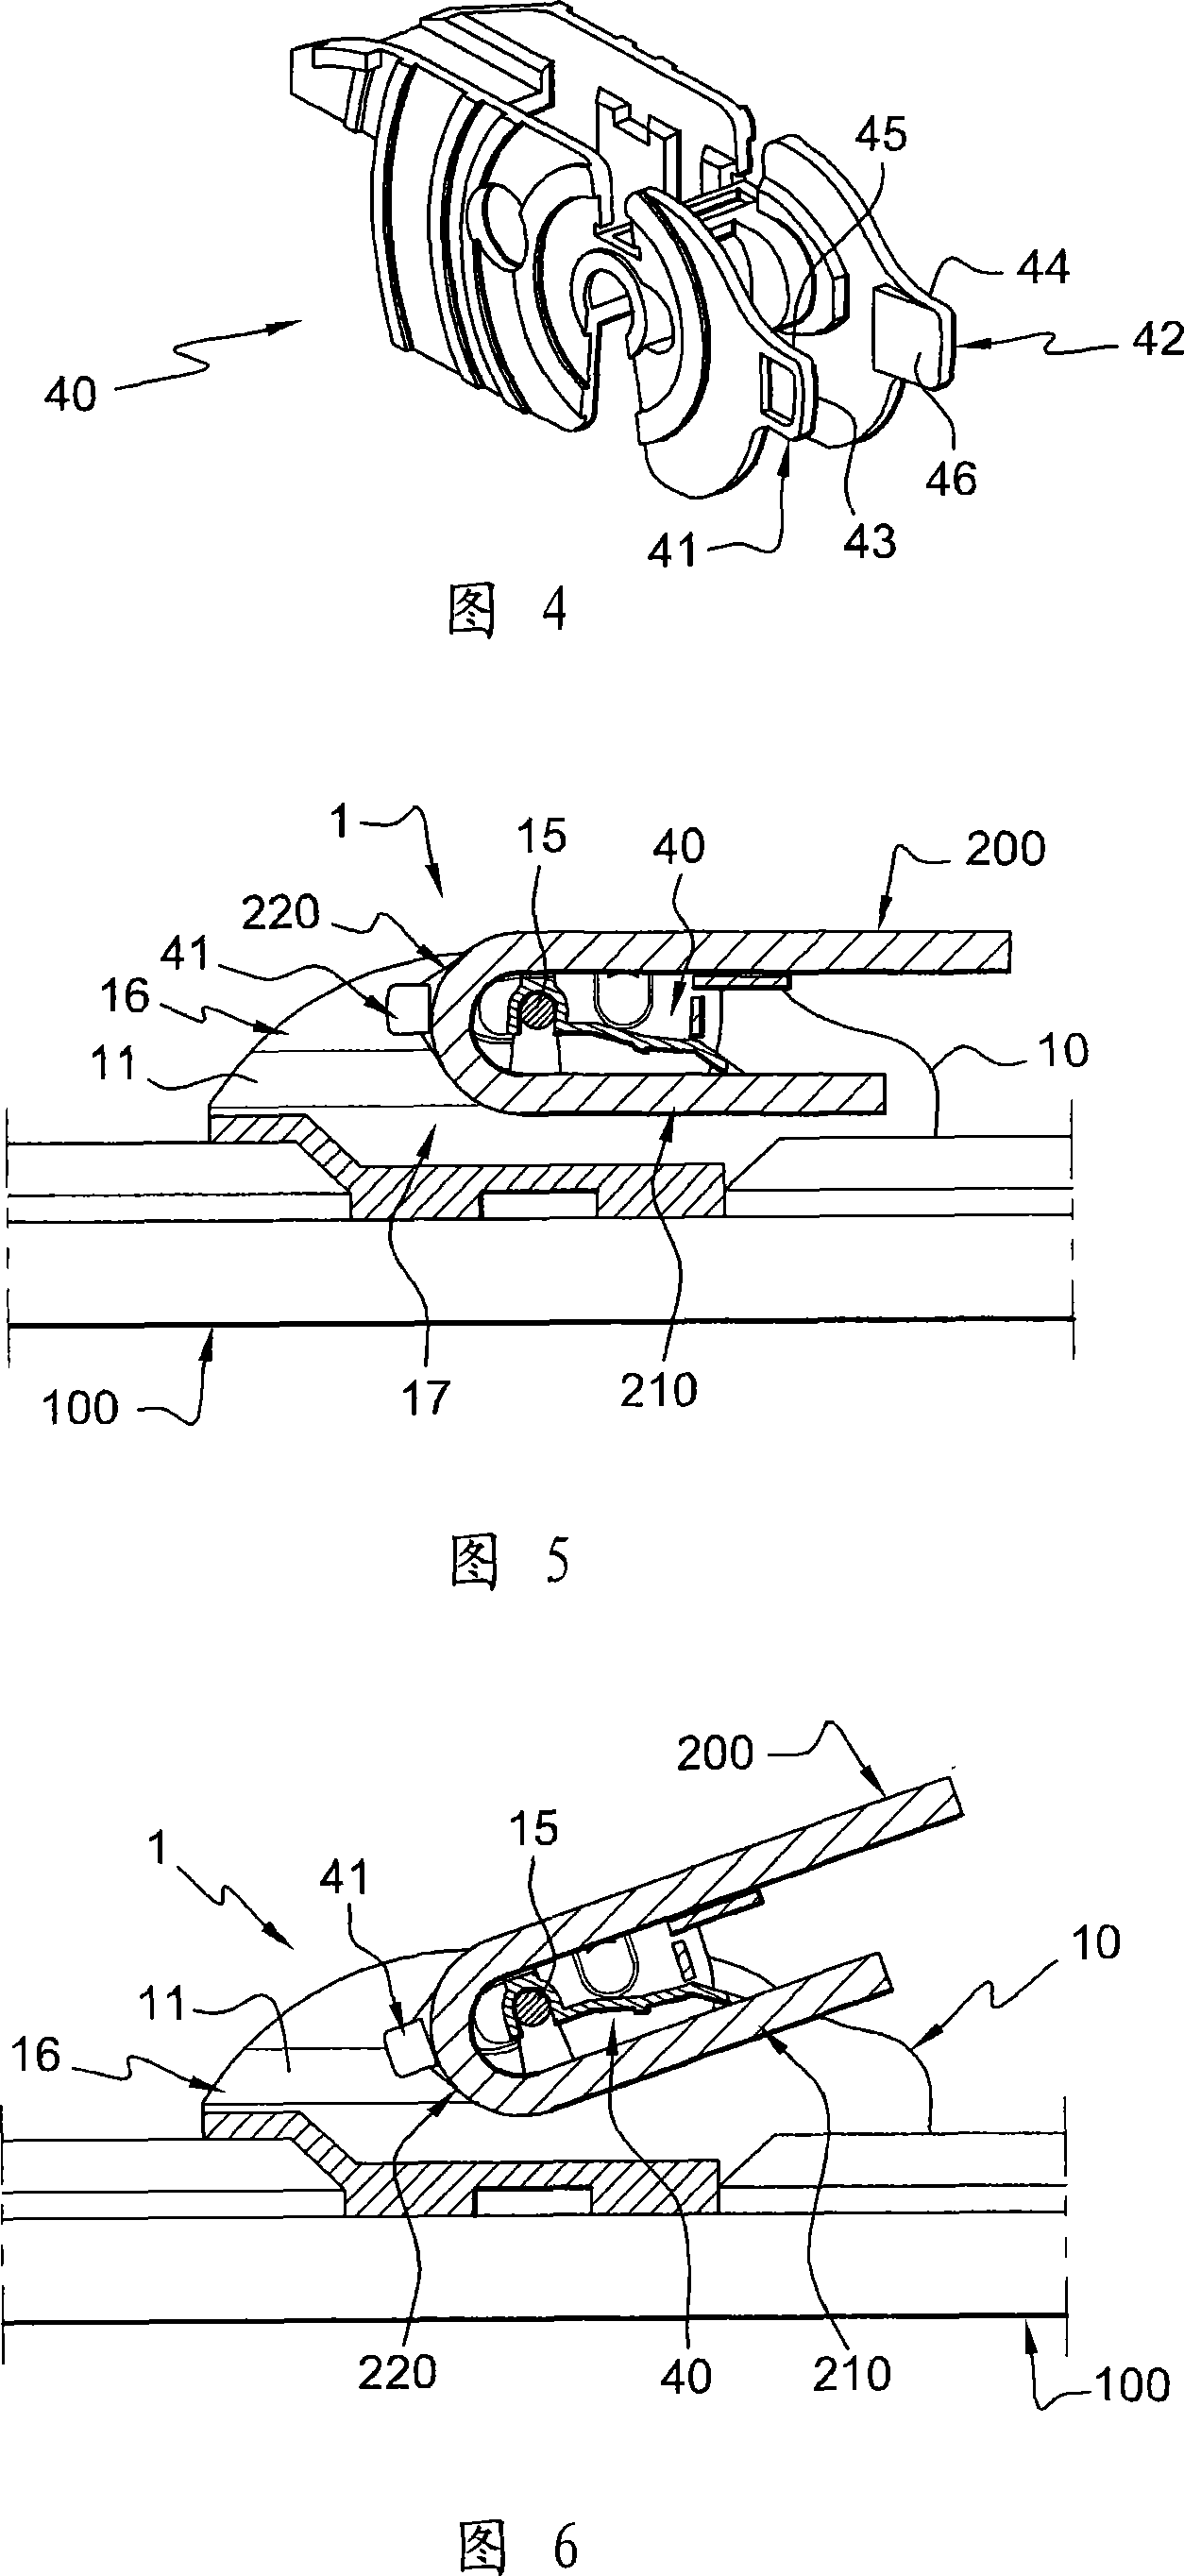 Device for attaching a windshield wiper blade on an arm